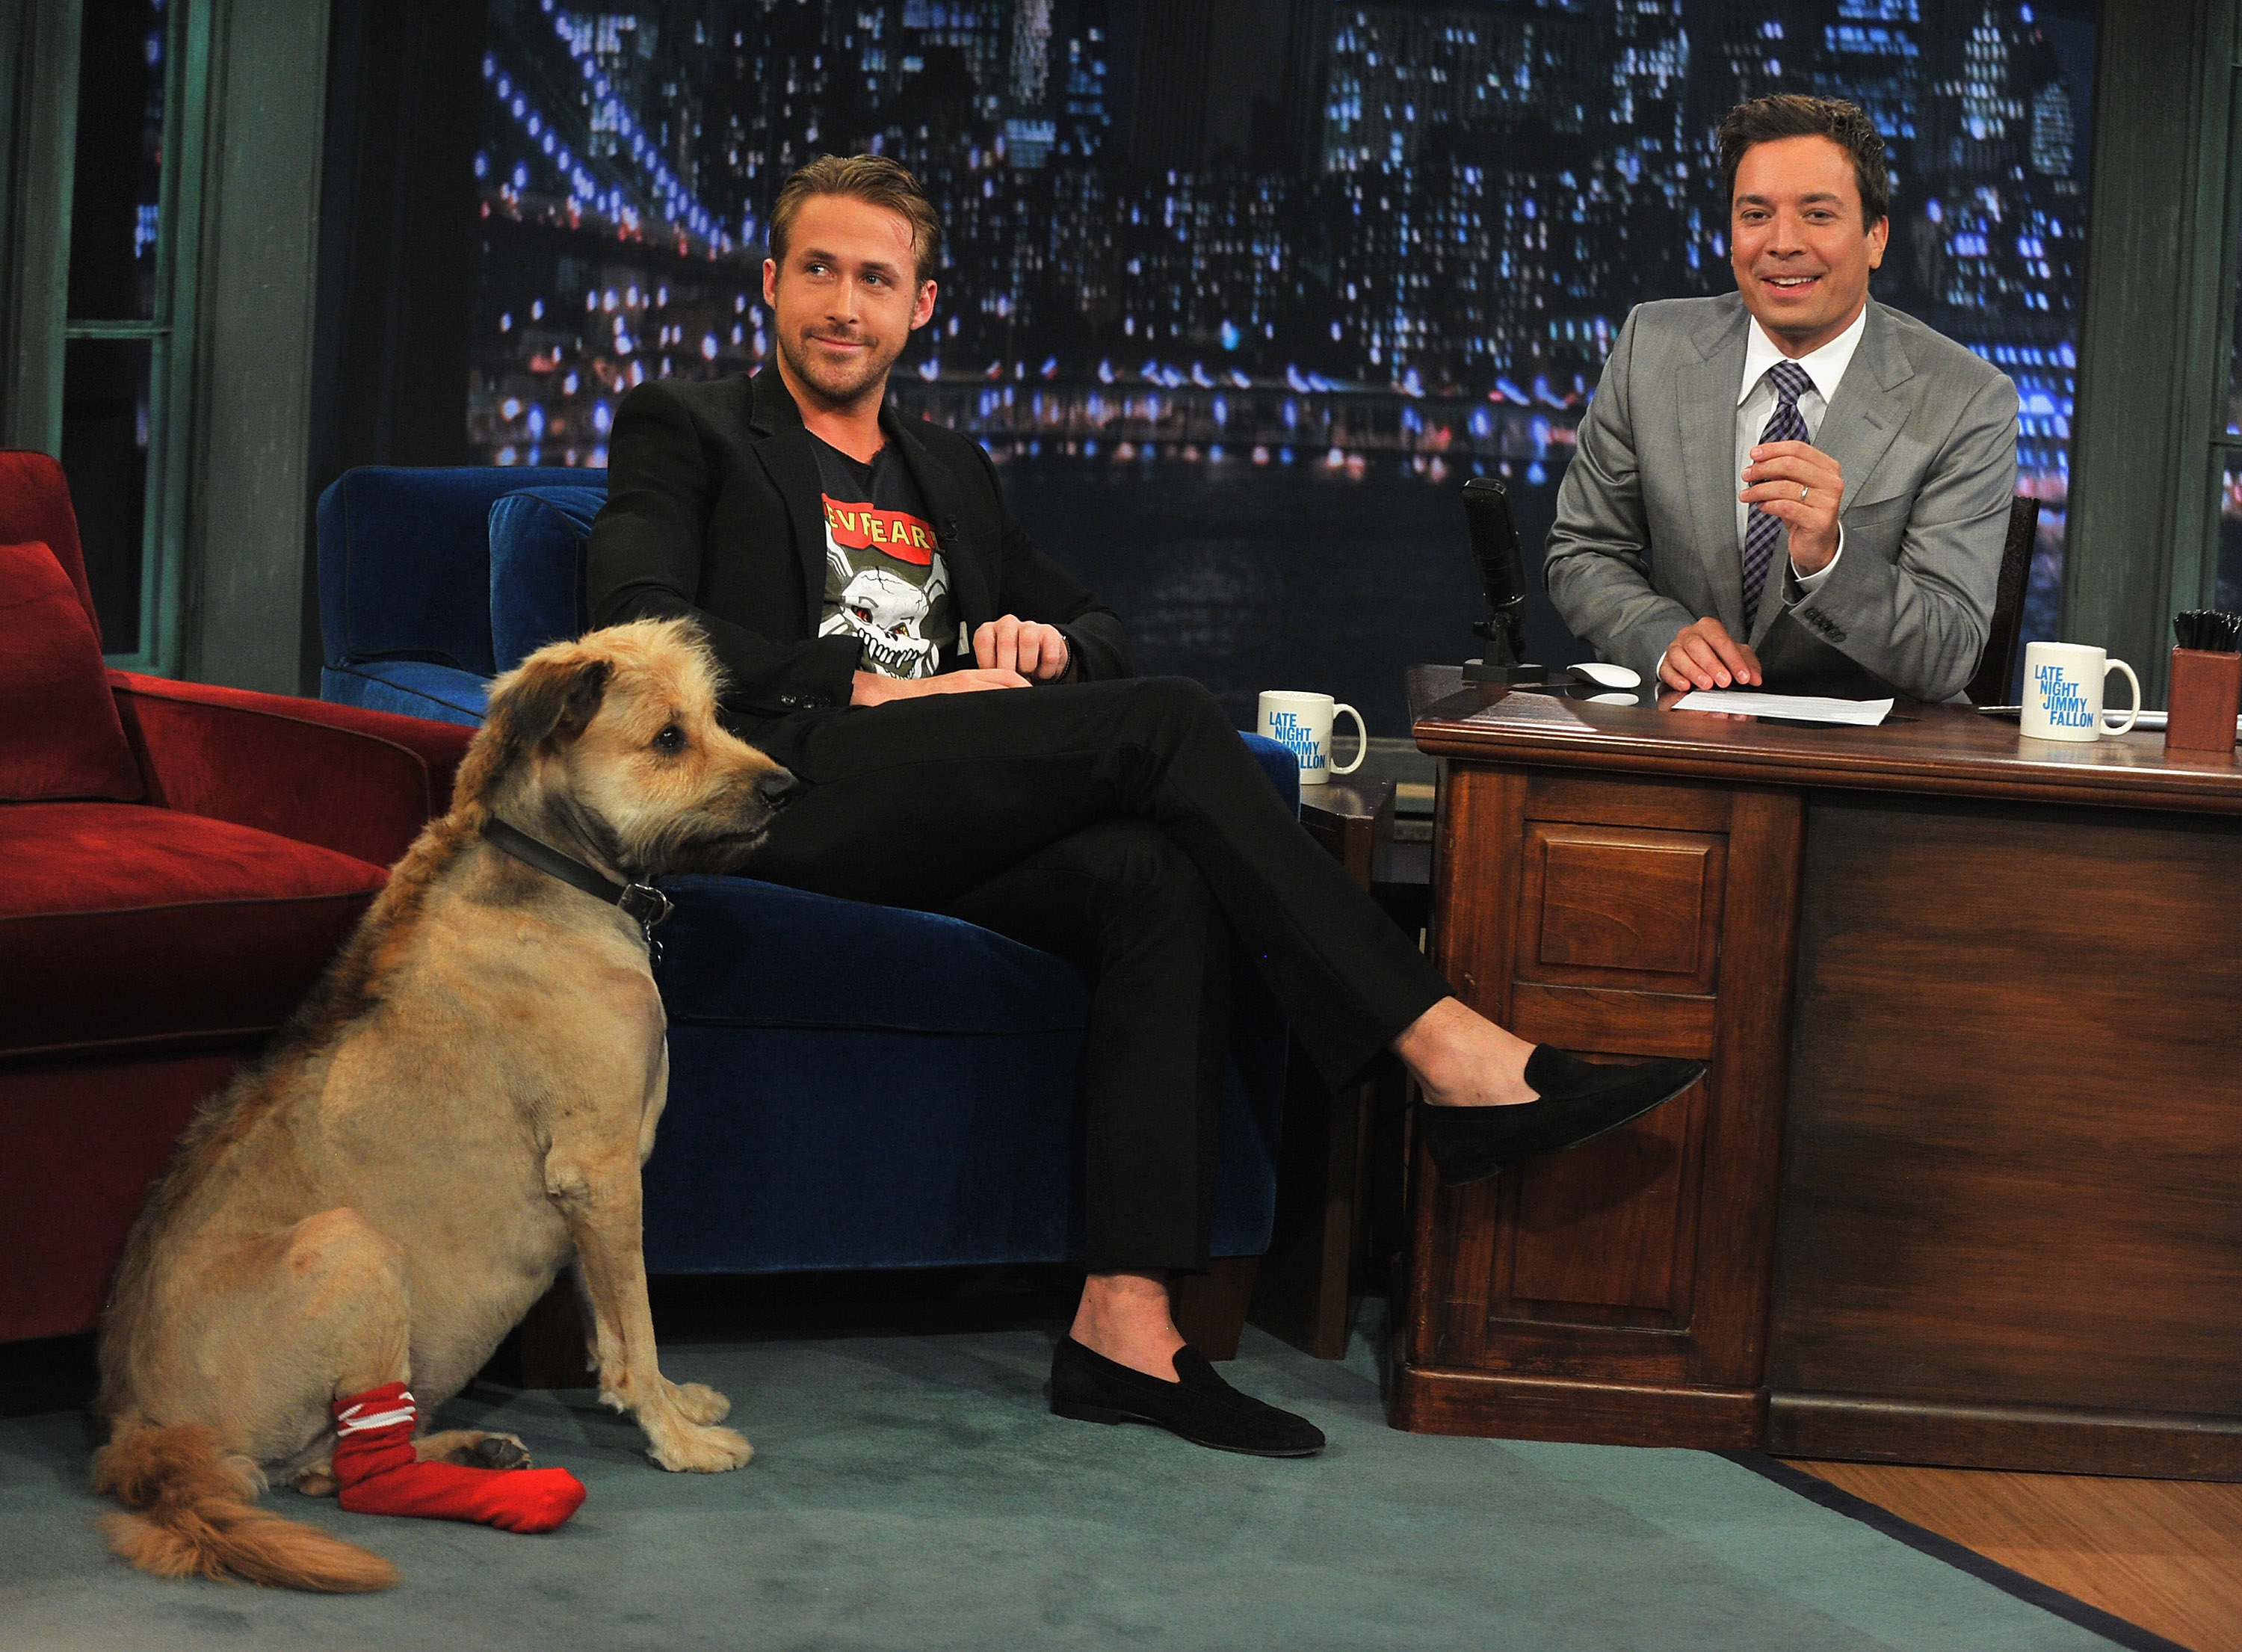 NEW YORK, NY - JULY 20:  Ryan Gosling along with his dog George visits "Late Night With Jimmy Fallon" at Rockefeller Center on July 20, 2011 in New York City.  (Photo by Theo Wargo/Getty Images)